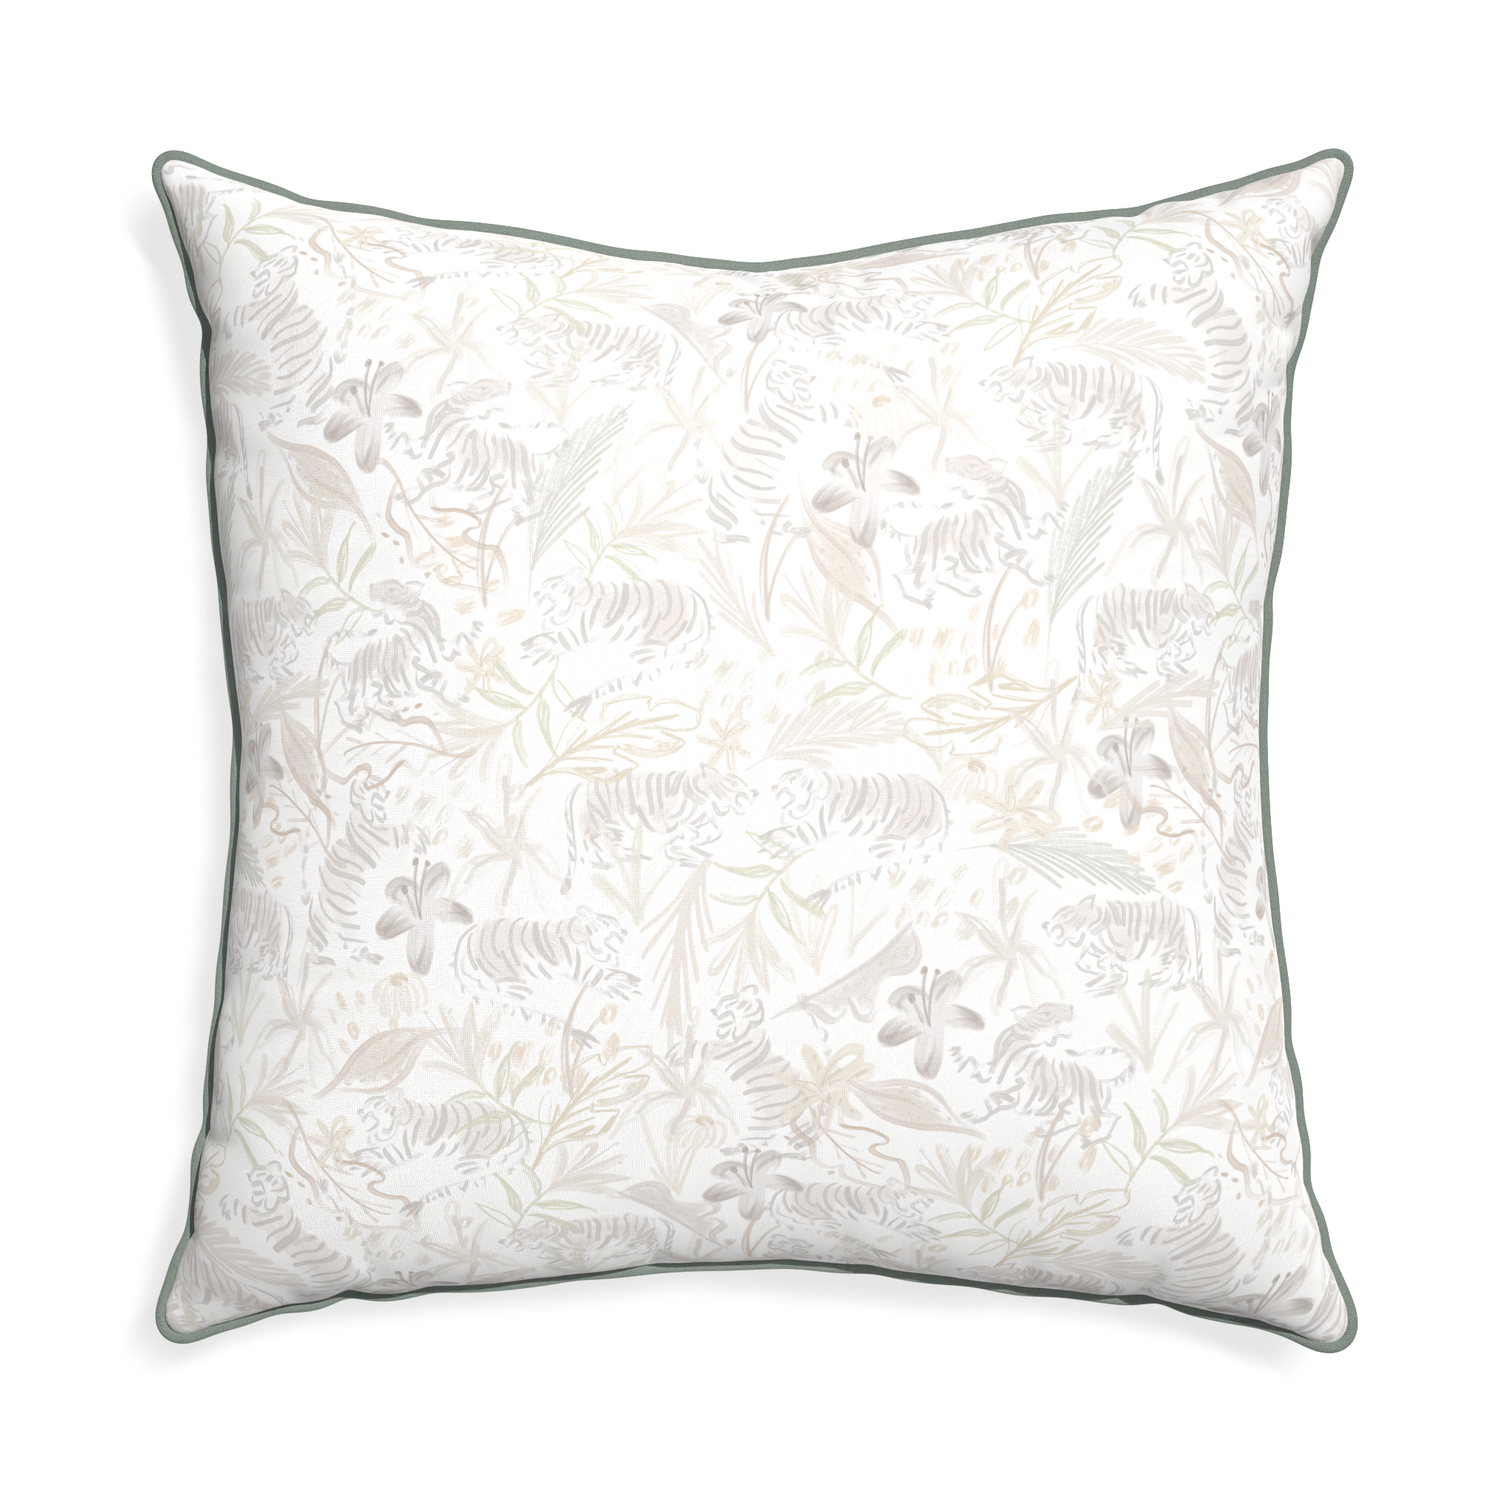 Euro-sham frida sand custom beige chinoiserie tigerpillow with sage piping on white background